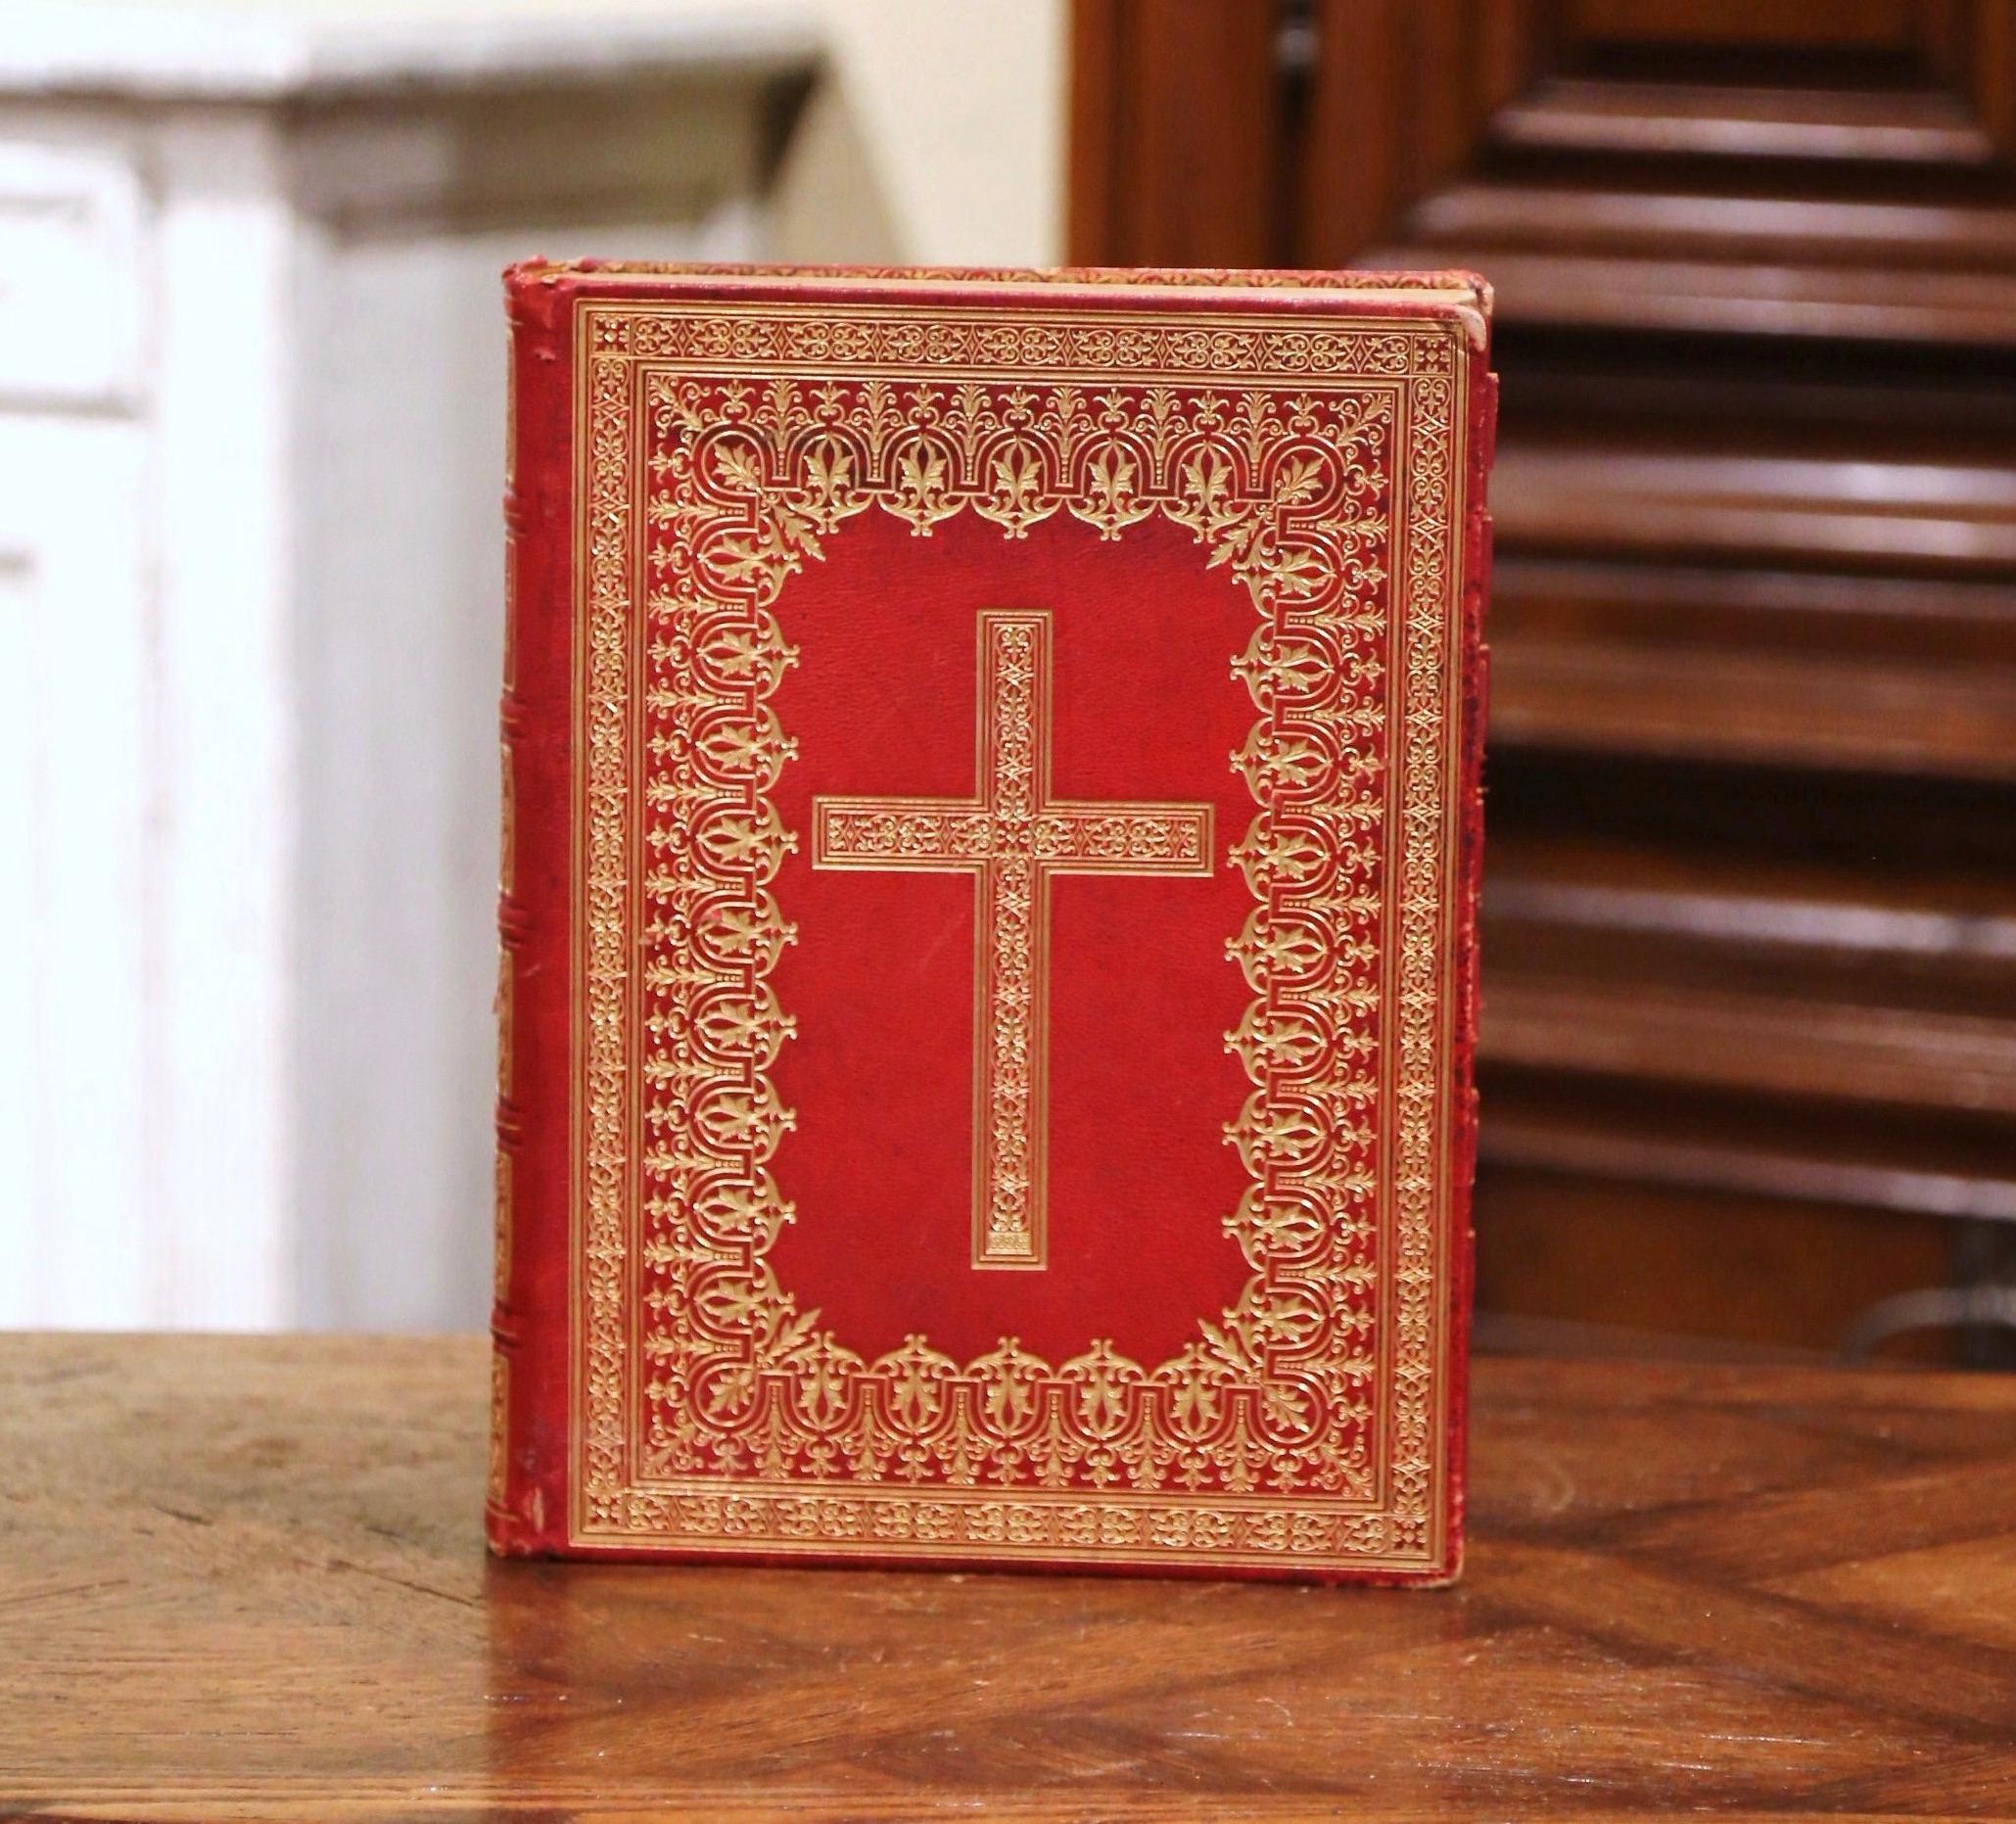 Decorate an office or study with this antique Holy book. Printed in Italy circa 1923, the Missale Romanum is written in Latin and bounded in a red leather cover with gilt tooling and gold leaf edge pages; it is illustrated with black and white plate